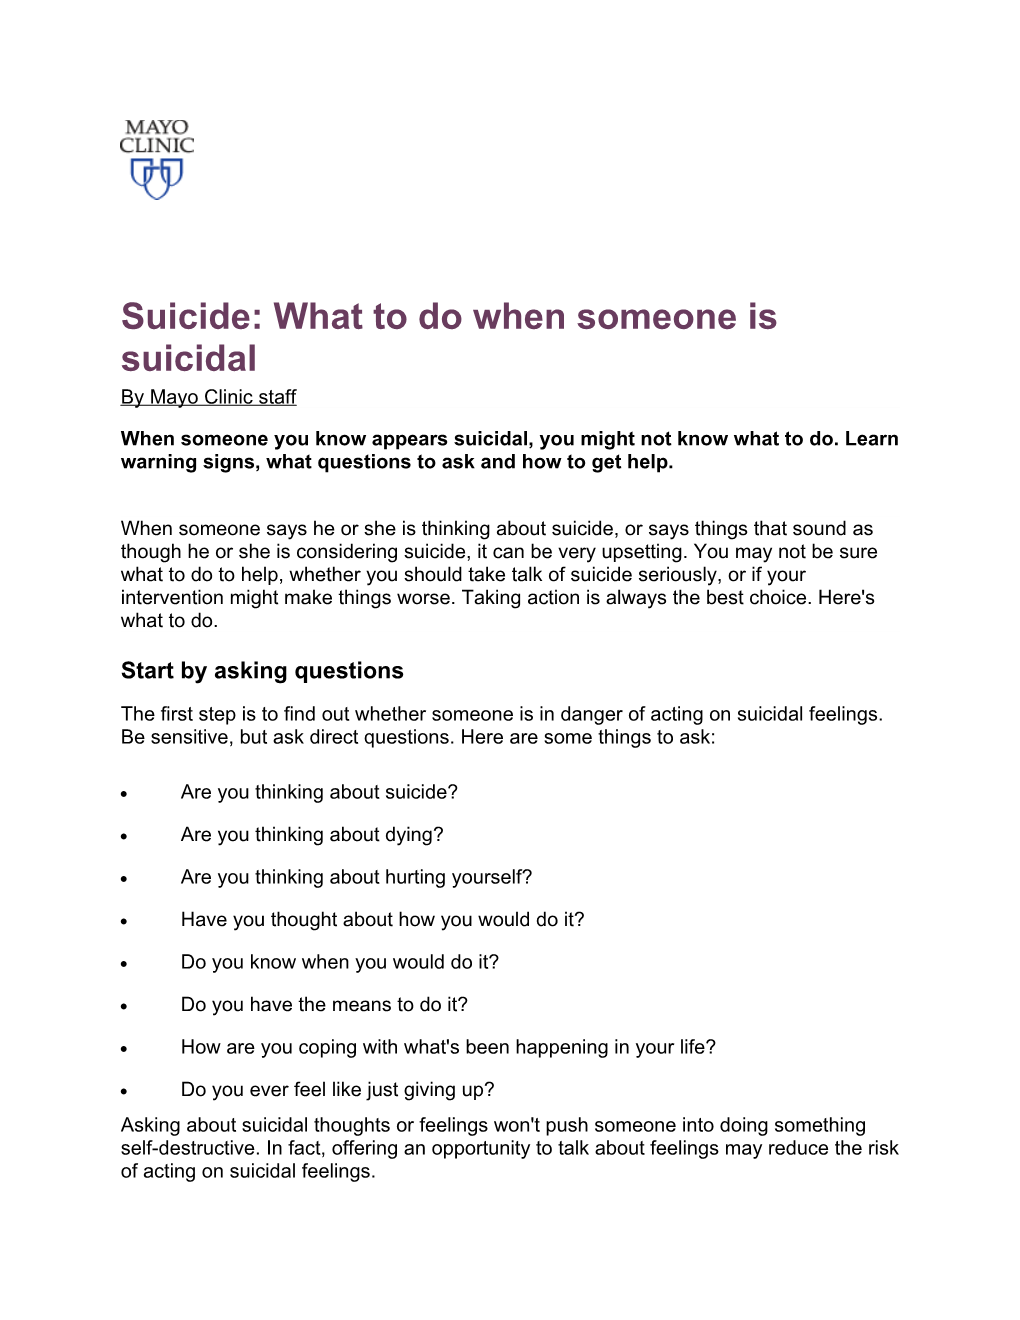 Suicide: What to Do When Someone Is Suicidal